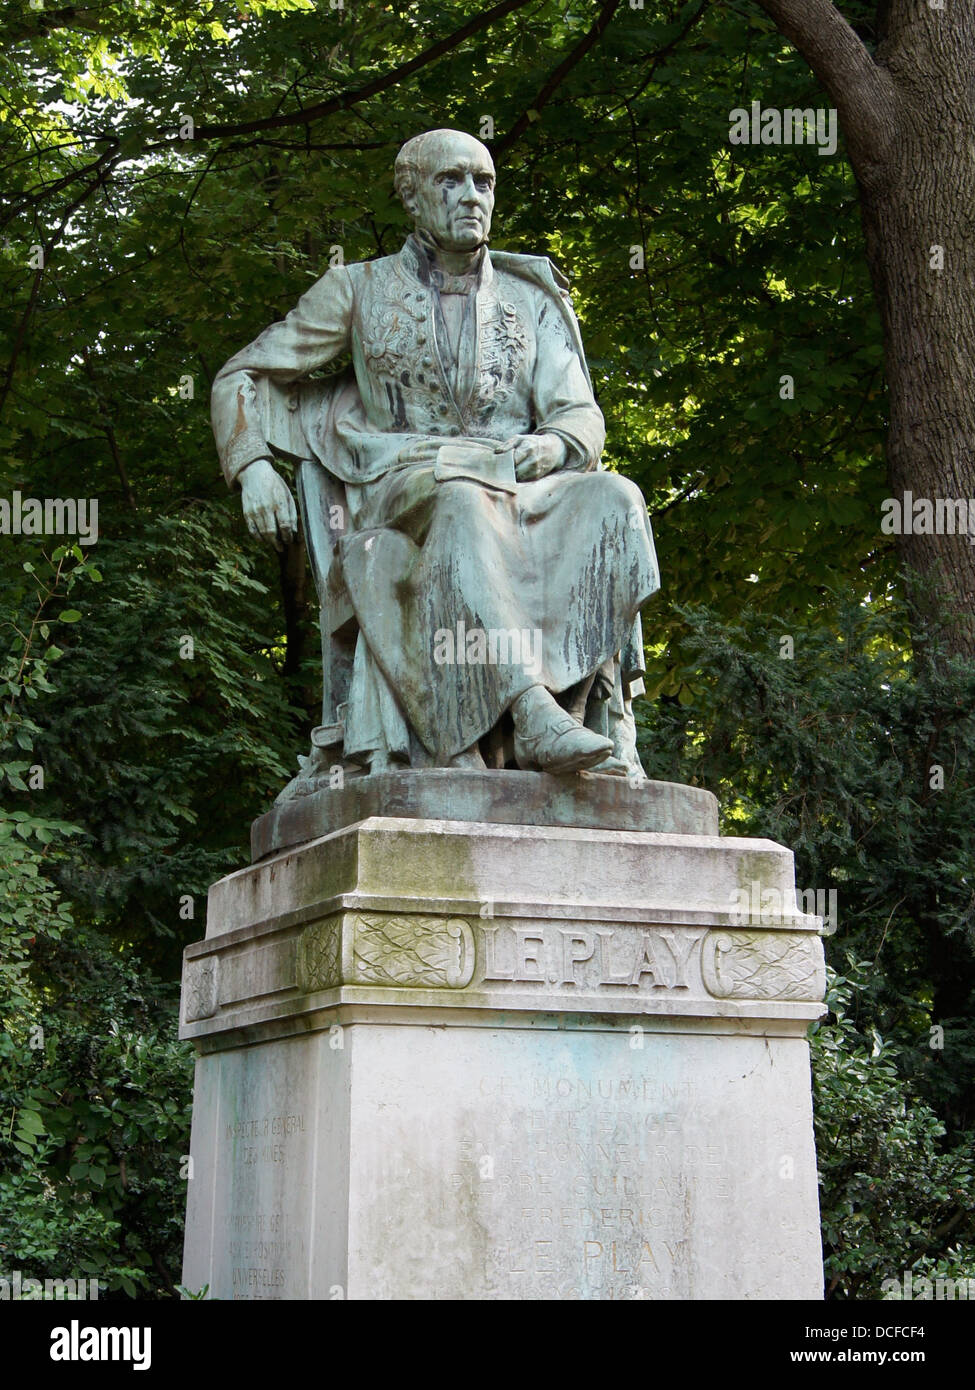 Statue of Frédéric Le Play by André-Joseph Allar (22 August 1845, 11 April 1926) In the Jardin du Luxembourg in Paris. Stock Photo